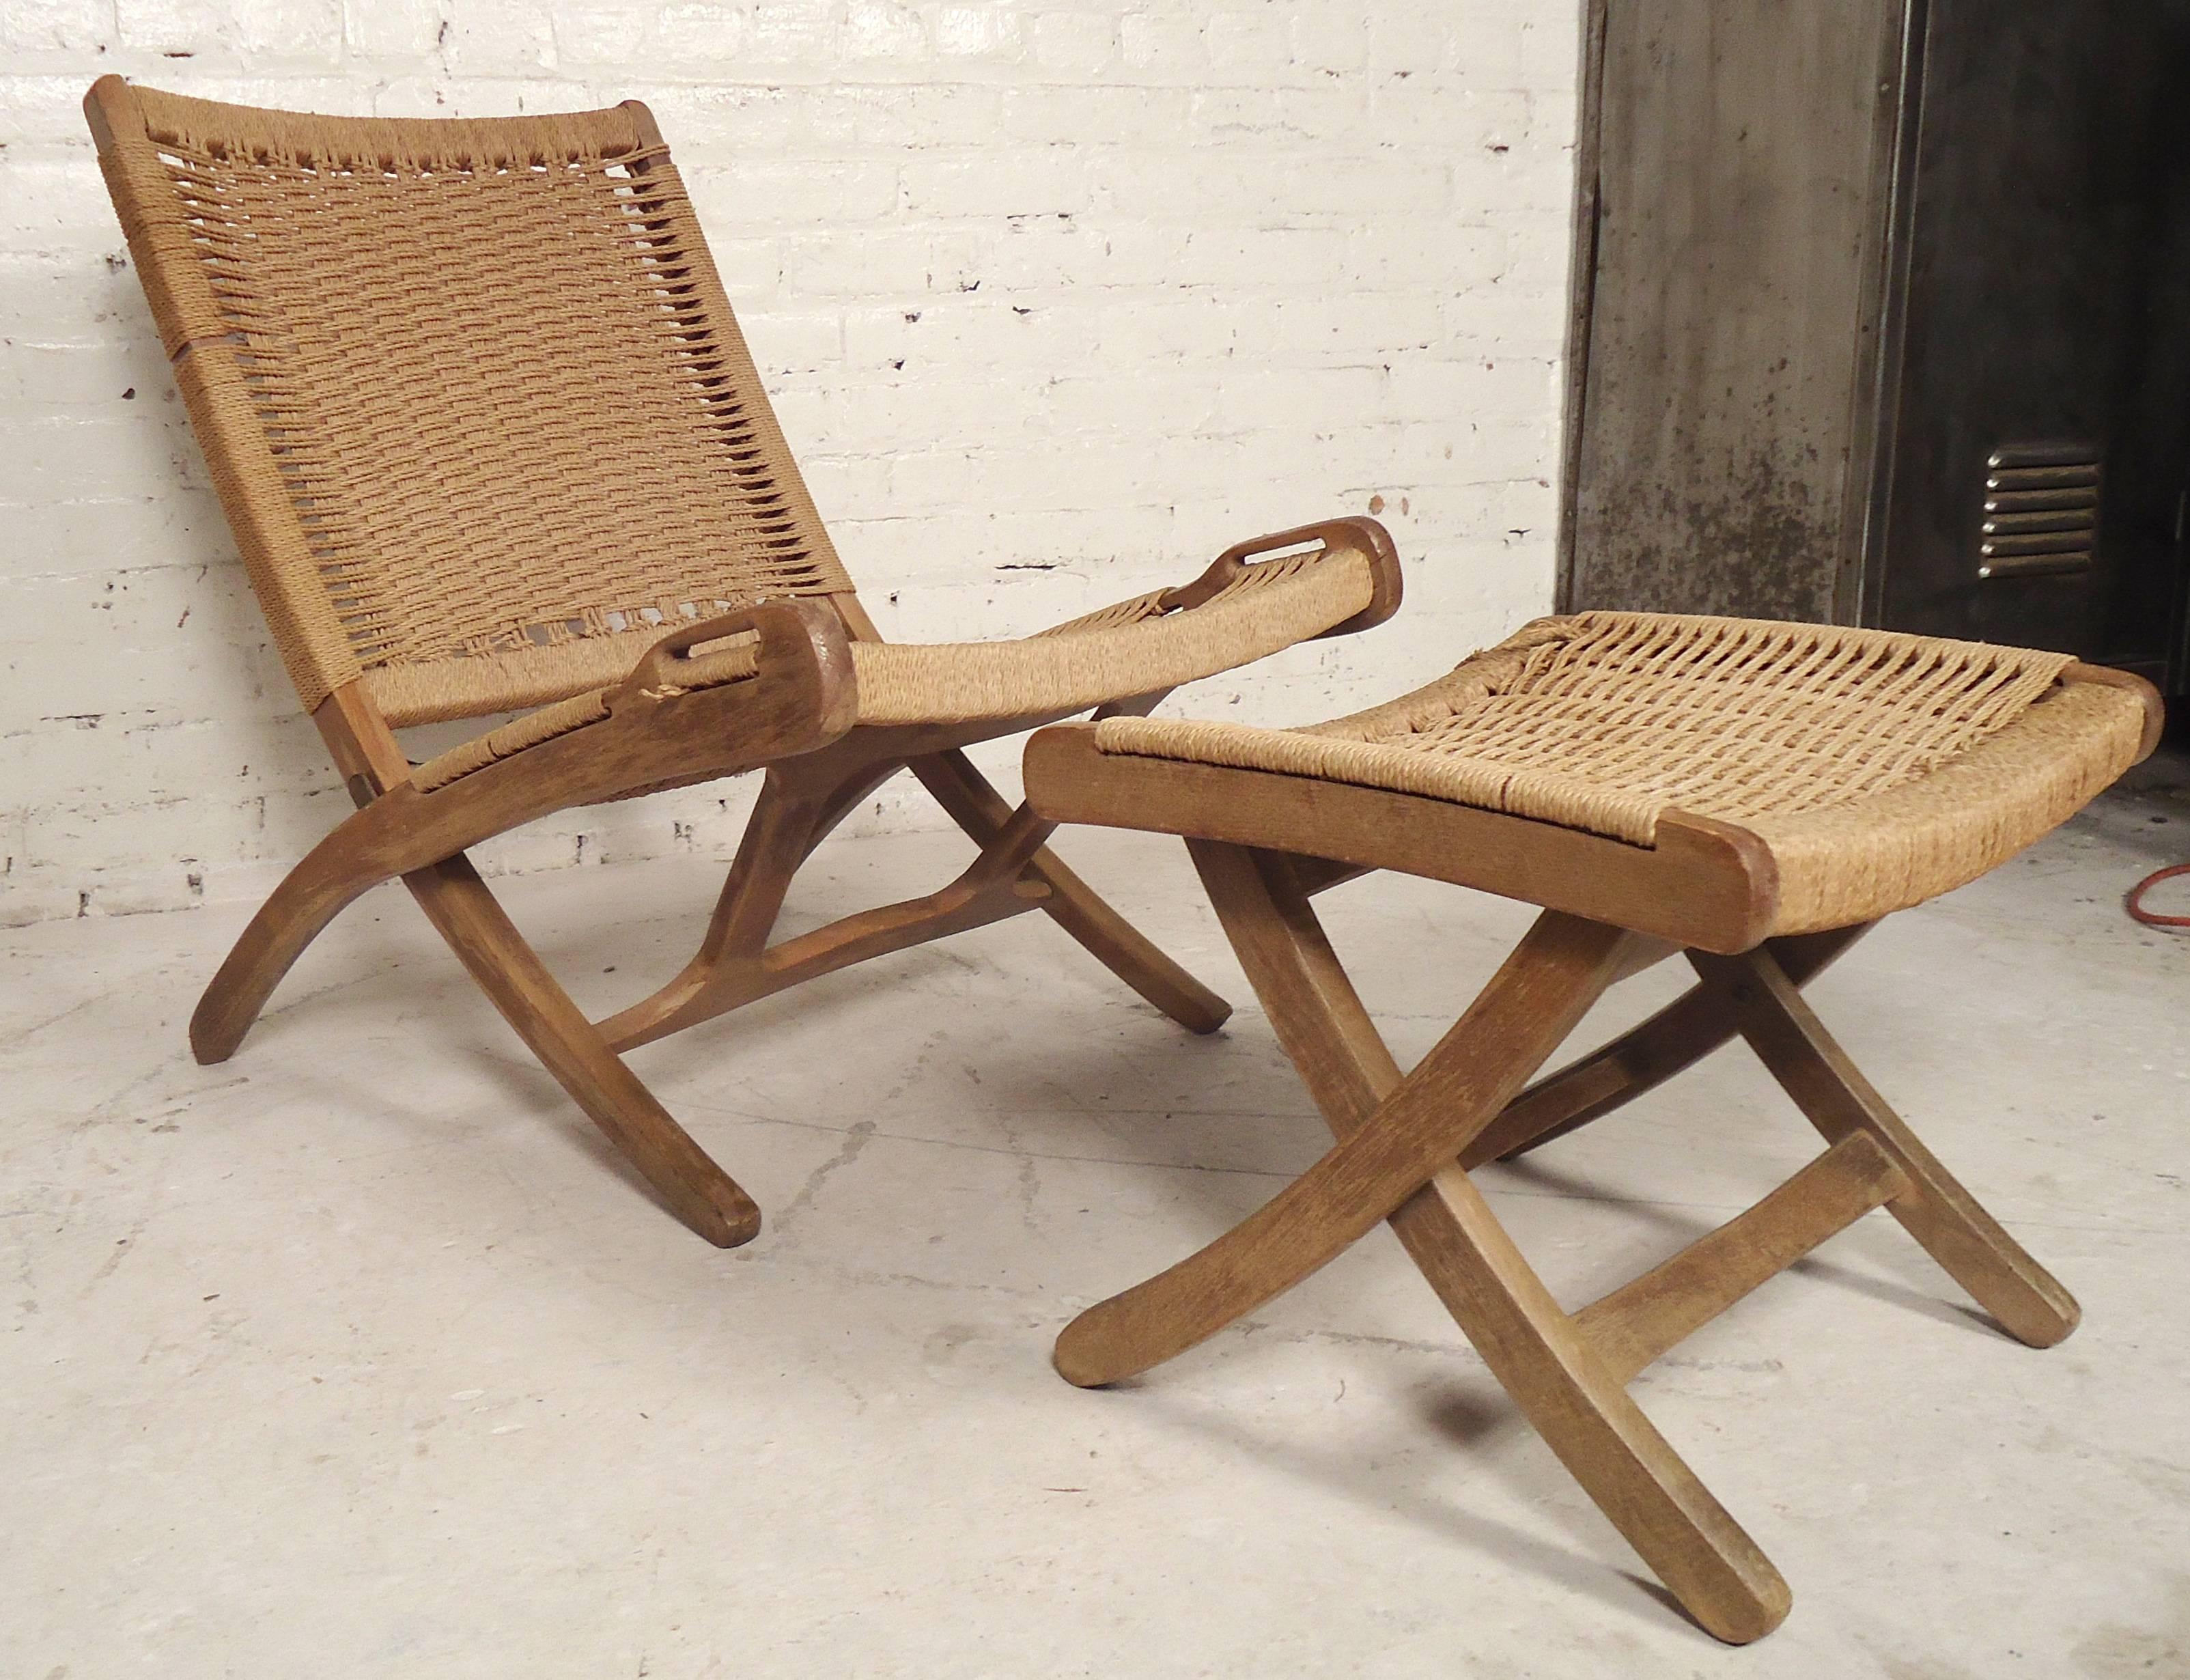 Classic Hans Wegner style woven rope chair with ottoman. Comfortable low seating for indoors or patio use with easy folding.

(Please confirm item location NY or NJ with dealer).
       